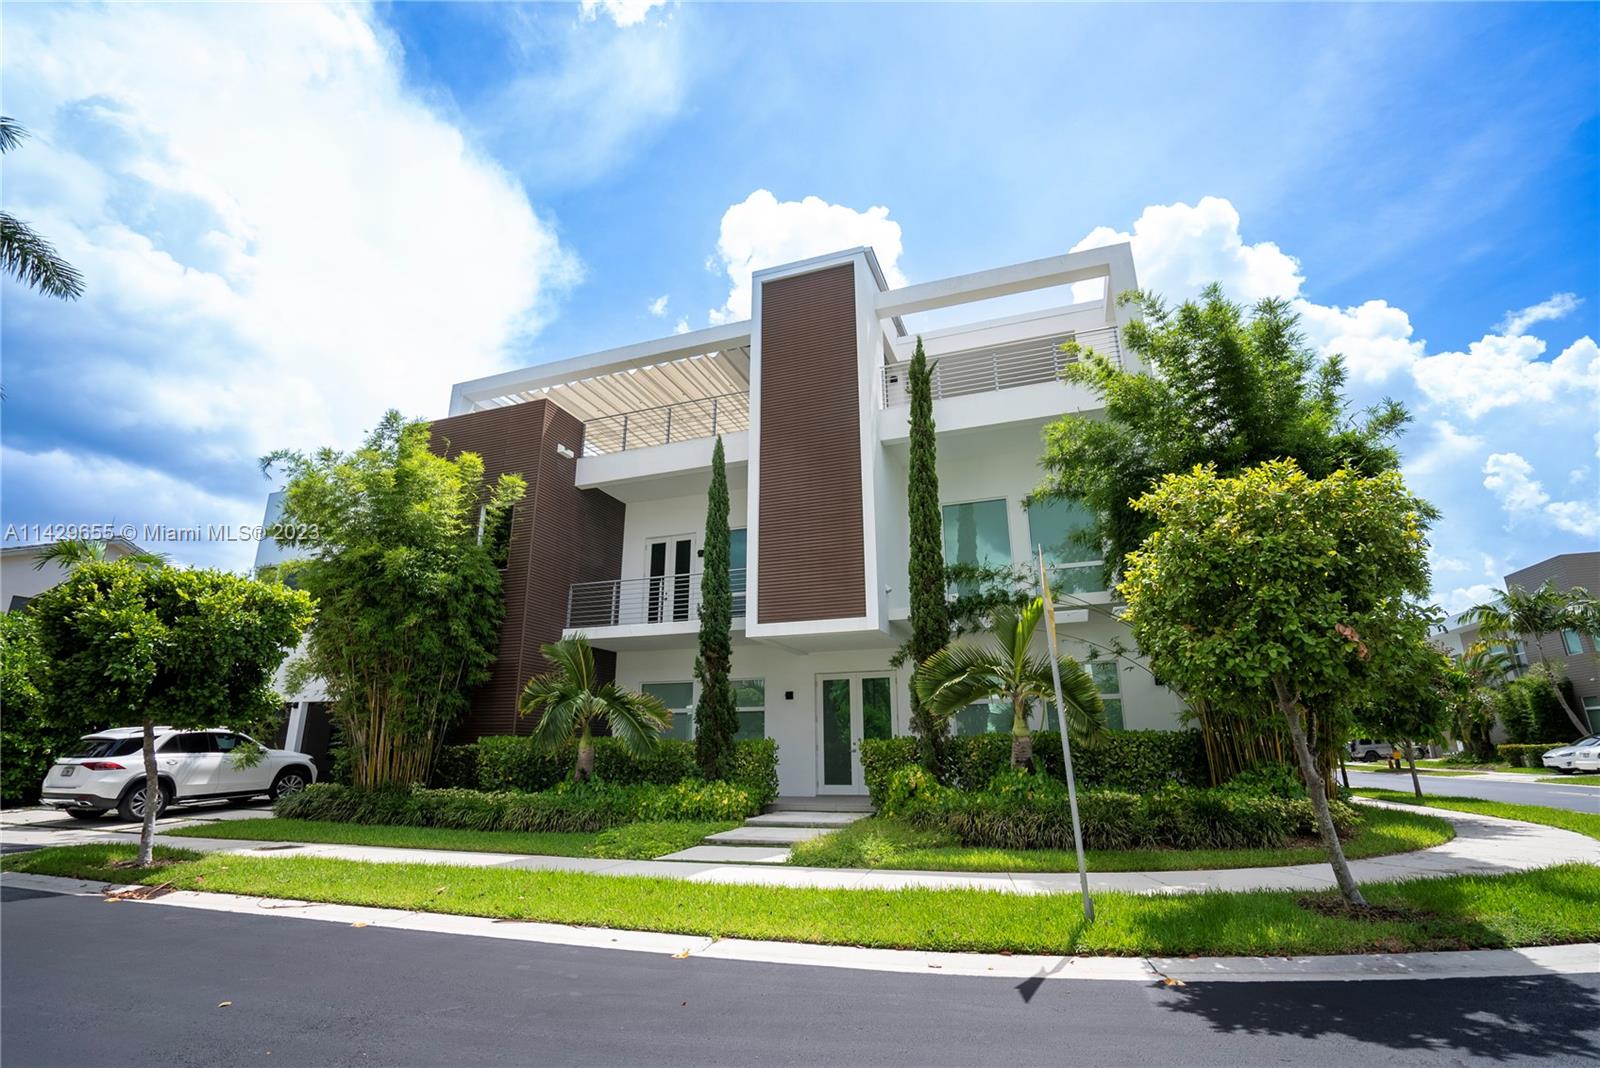 Address Not Disclosed, Doral, Miami-Dade County, Florida - 5 Bedrooms  
6 Bathrooms - 